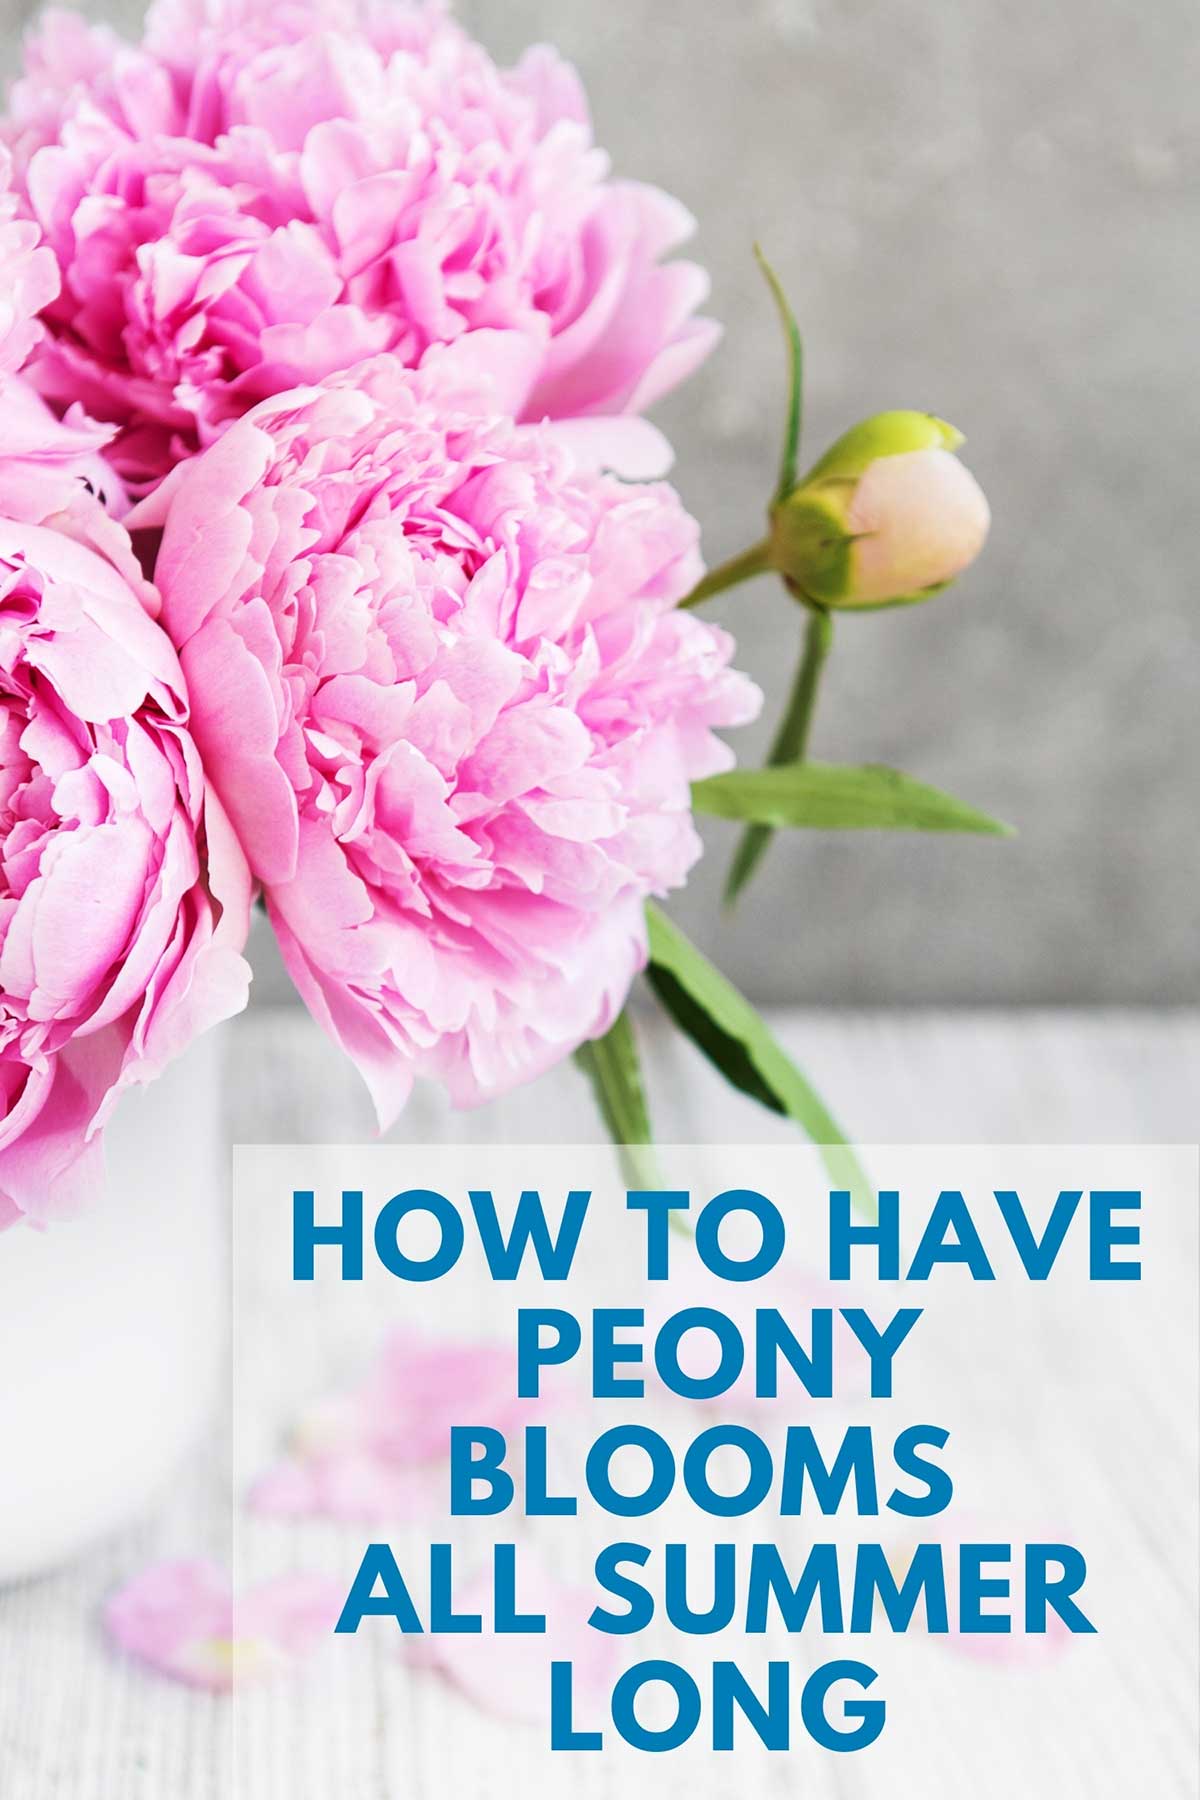 Pink peonies in a vase with a white background.